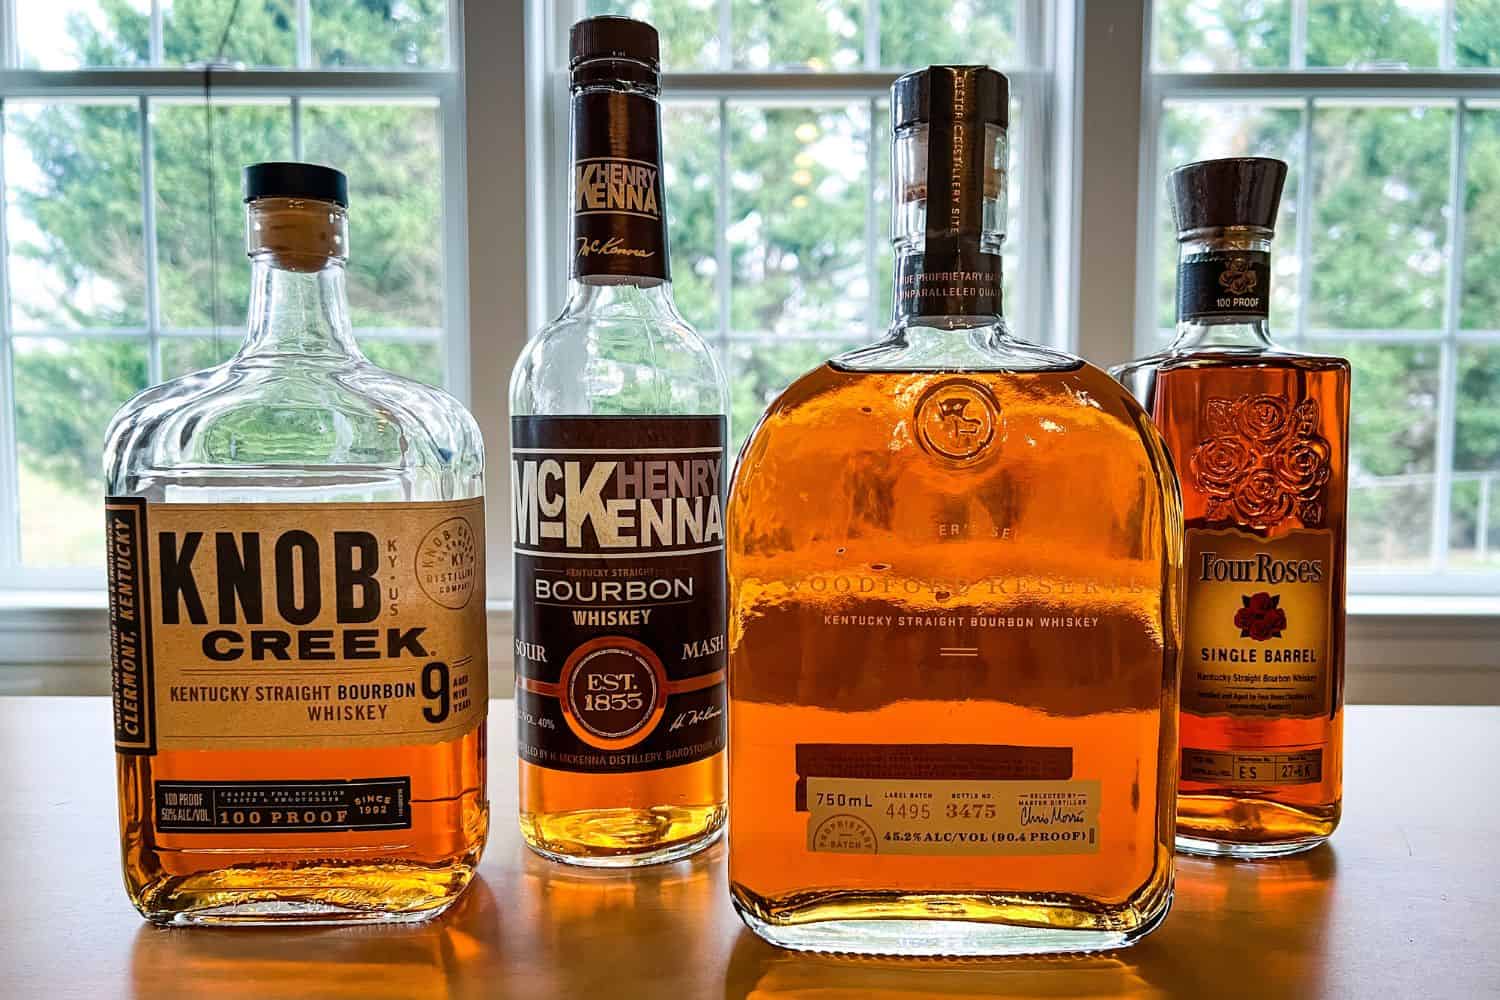 Bottles of Knob Creek, Henry McKenna, Woodford Reserve, and Four Roses Bourbon on a table in front of a window.